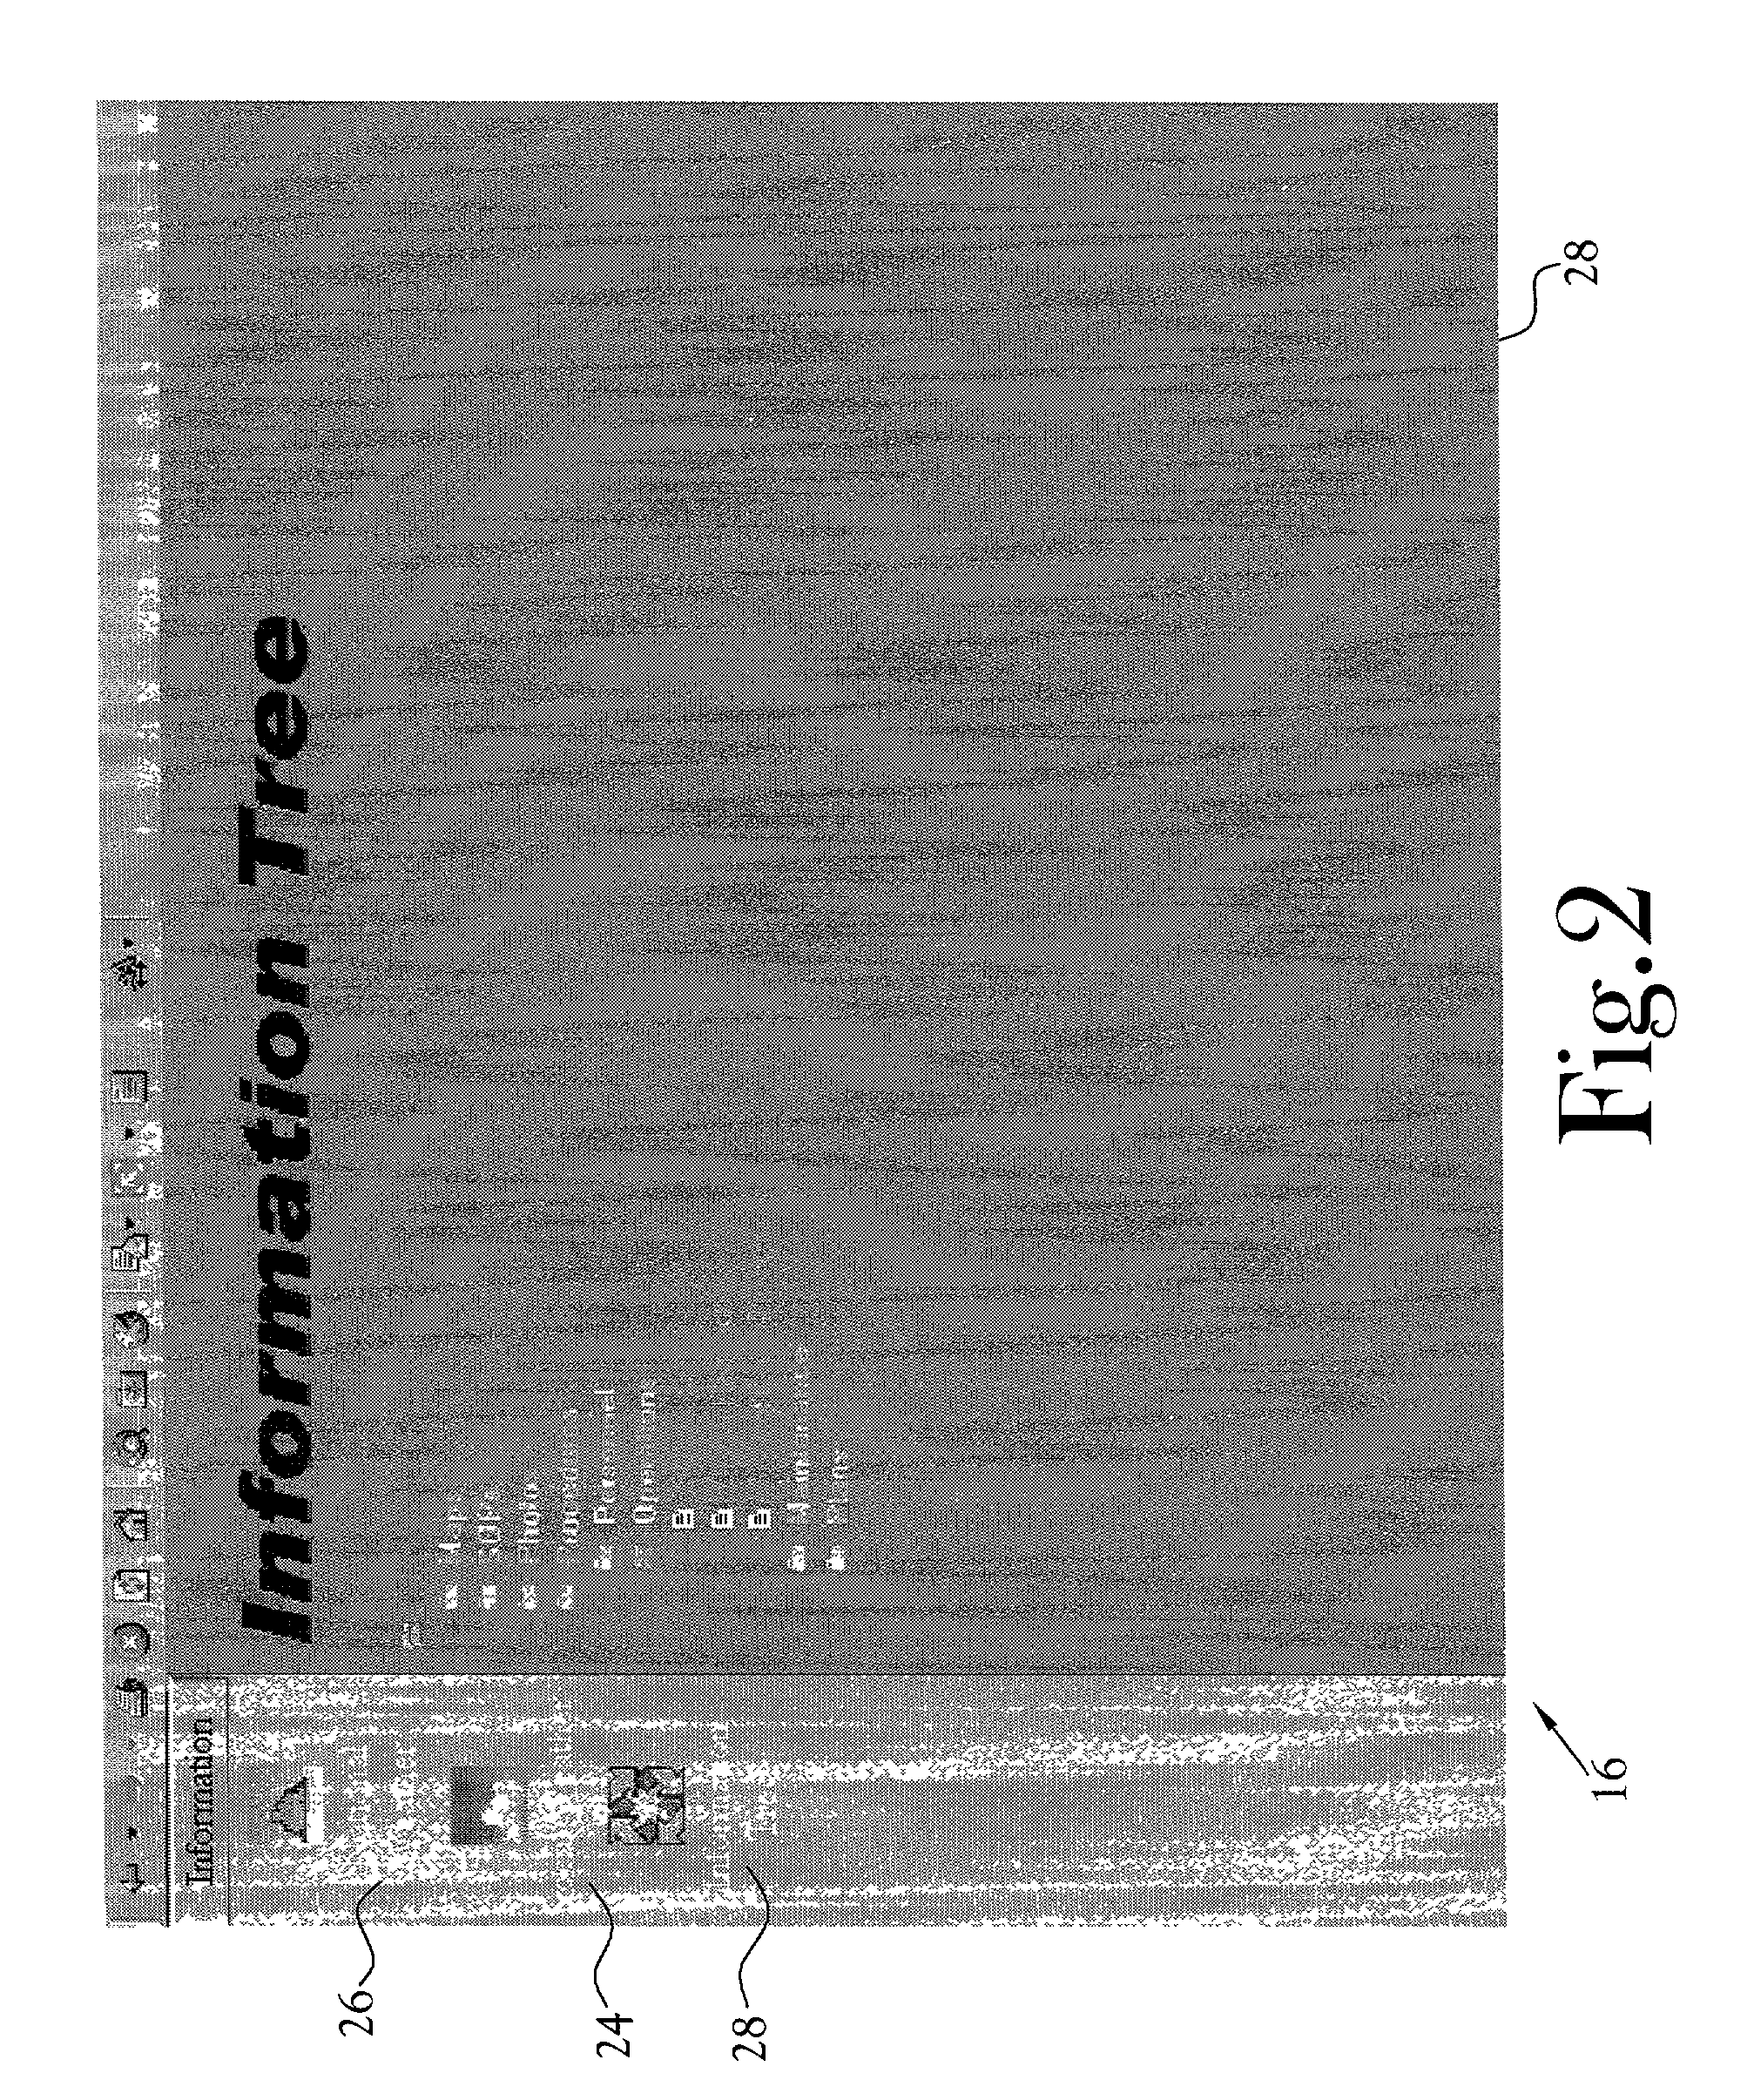 Method for managing resource assets for emergency situations